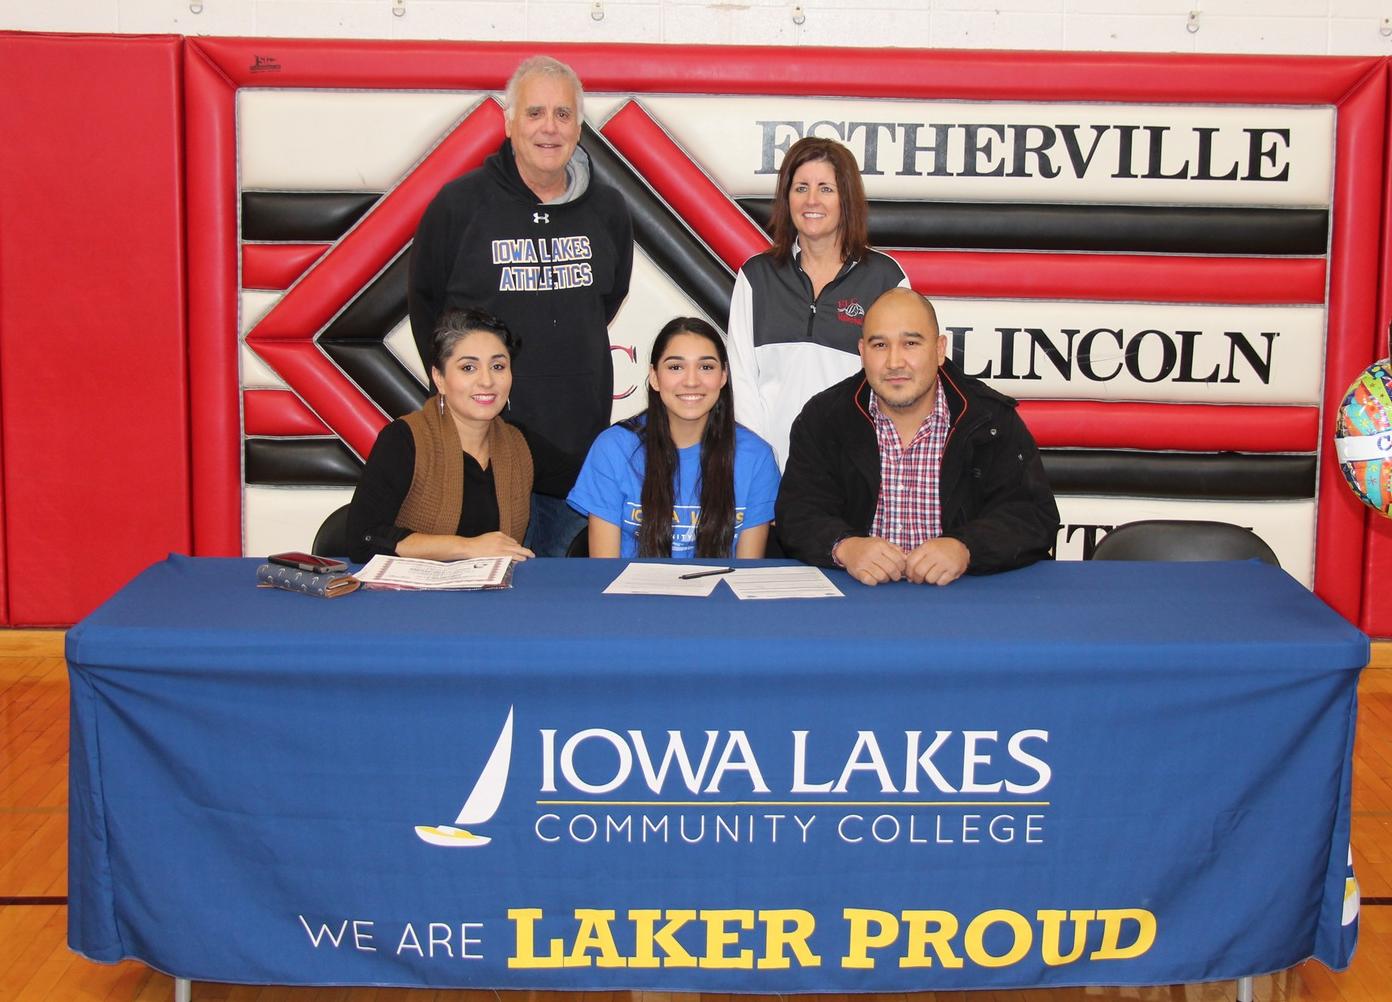 ELC SENIOR VOLLEYBALL PLAYER DANIA PONCE DIAZ SIGNS WITH LAKERS